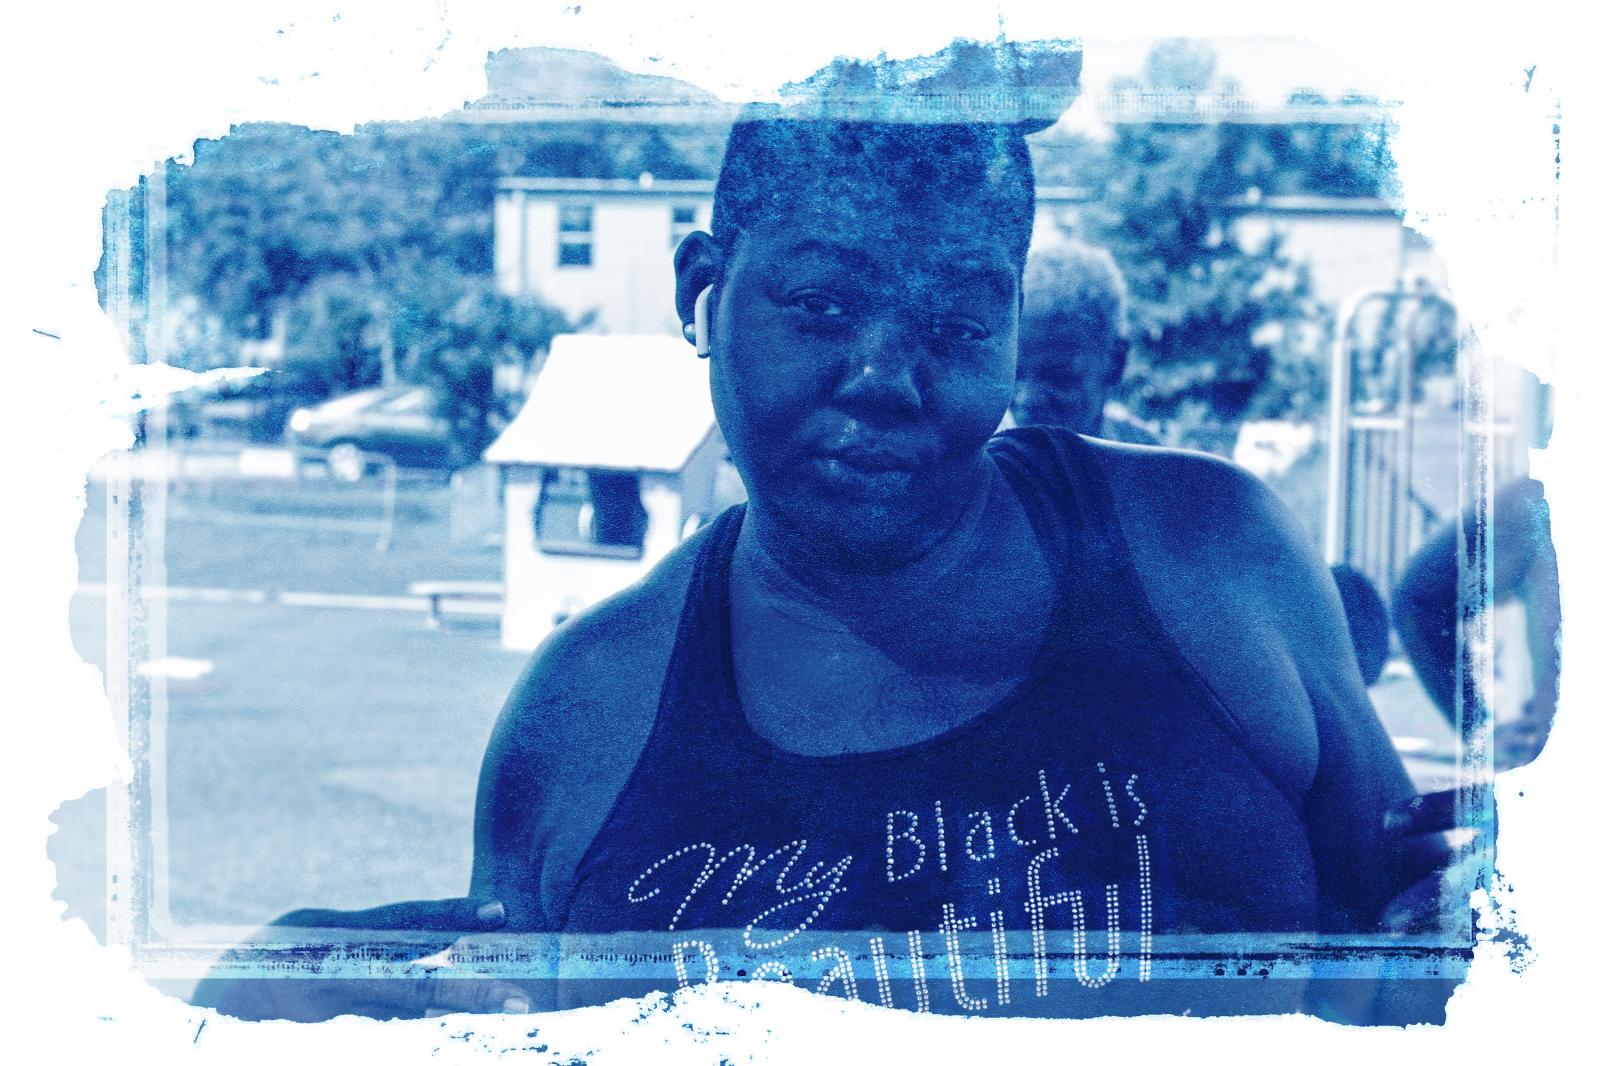 My Black is Beautiful, New Orleans, September 2020